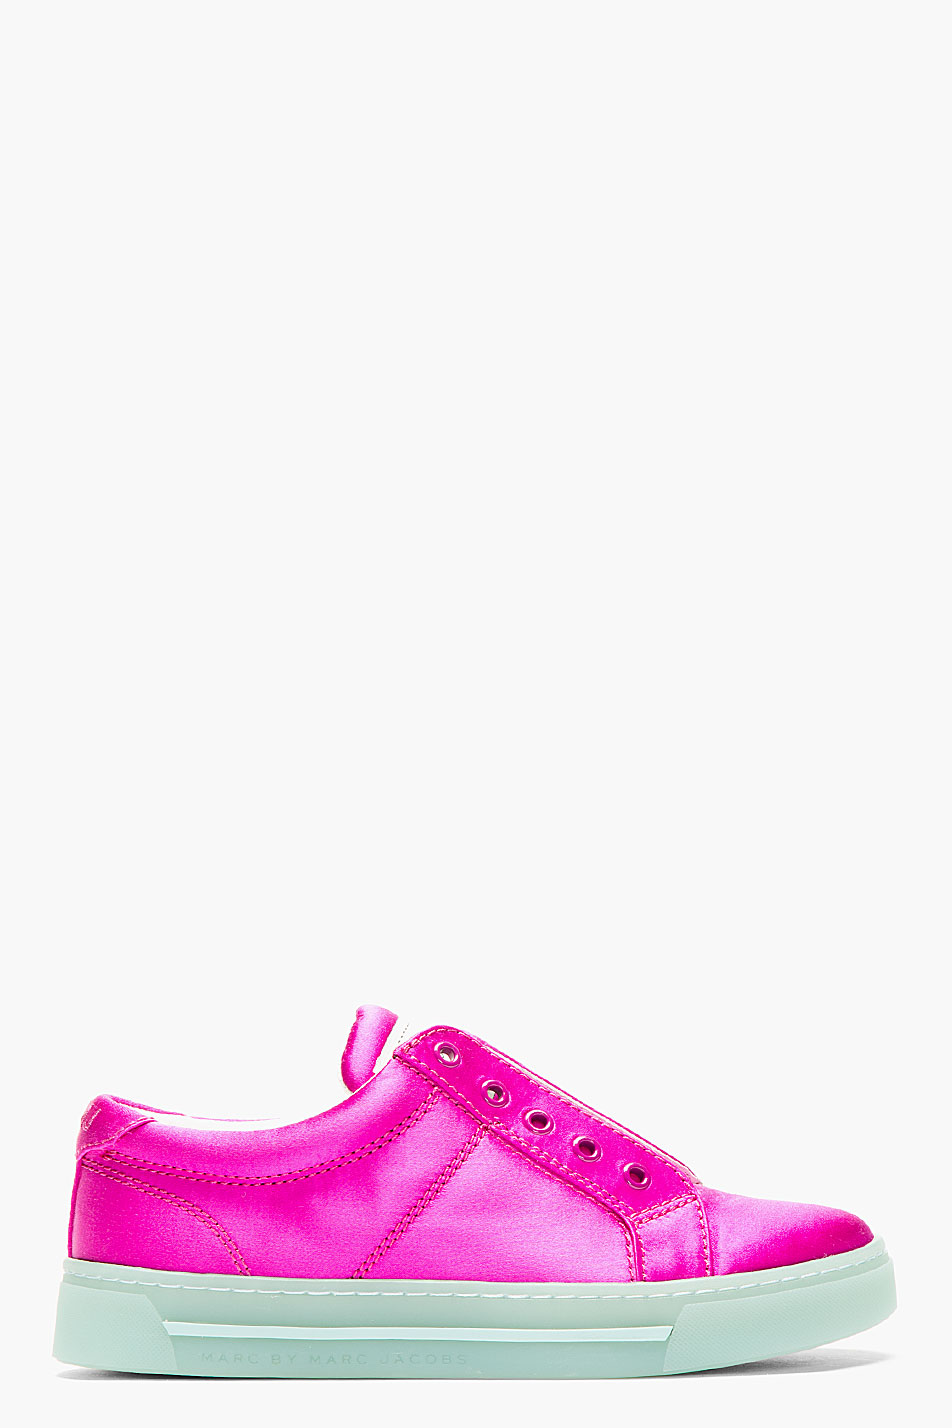 marc jacobs pink shoes